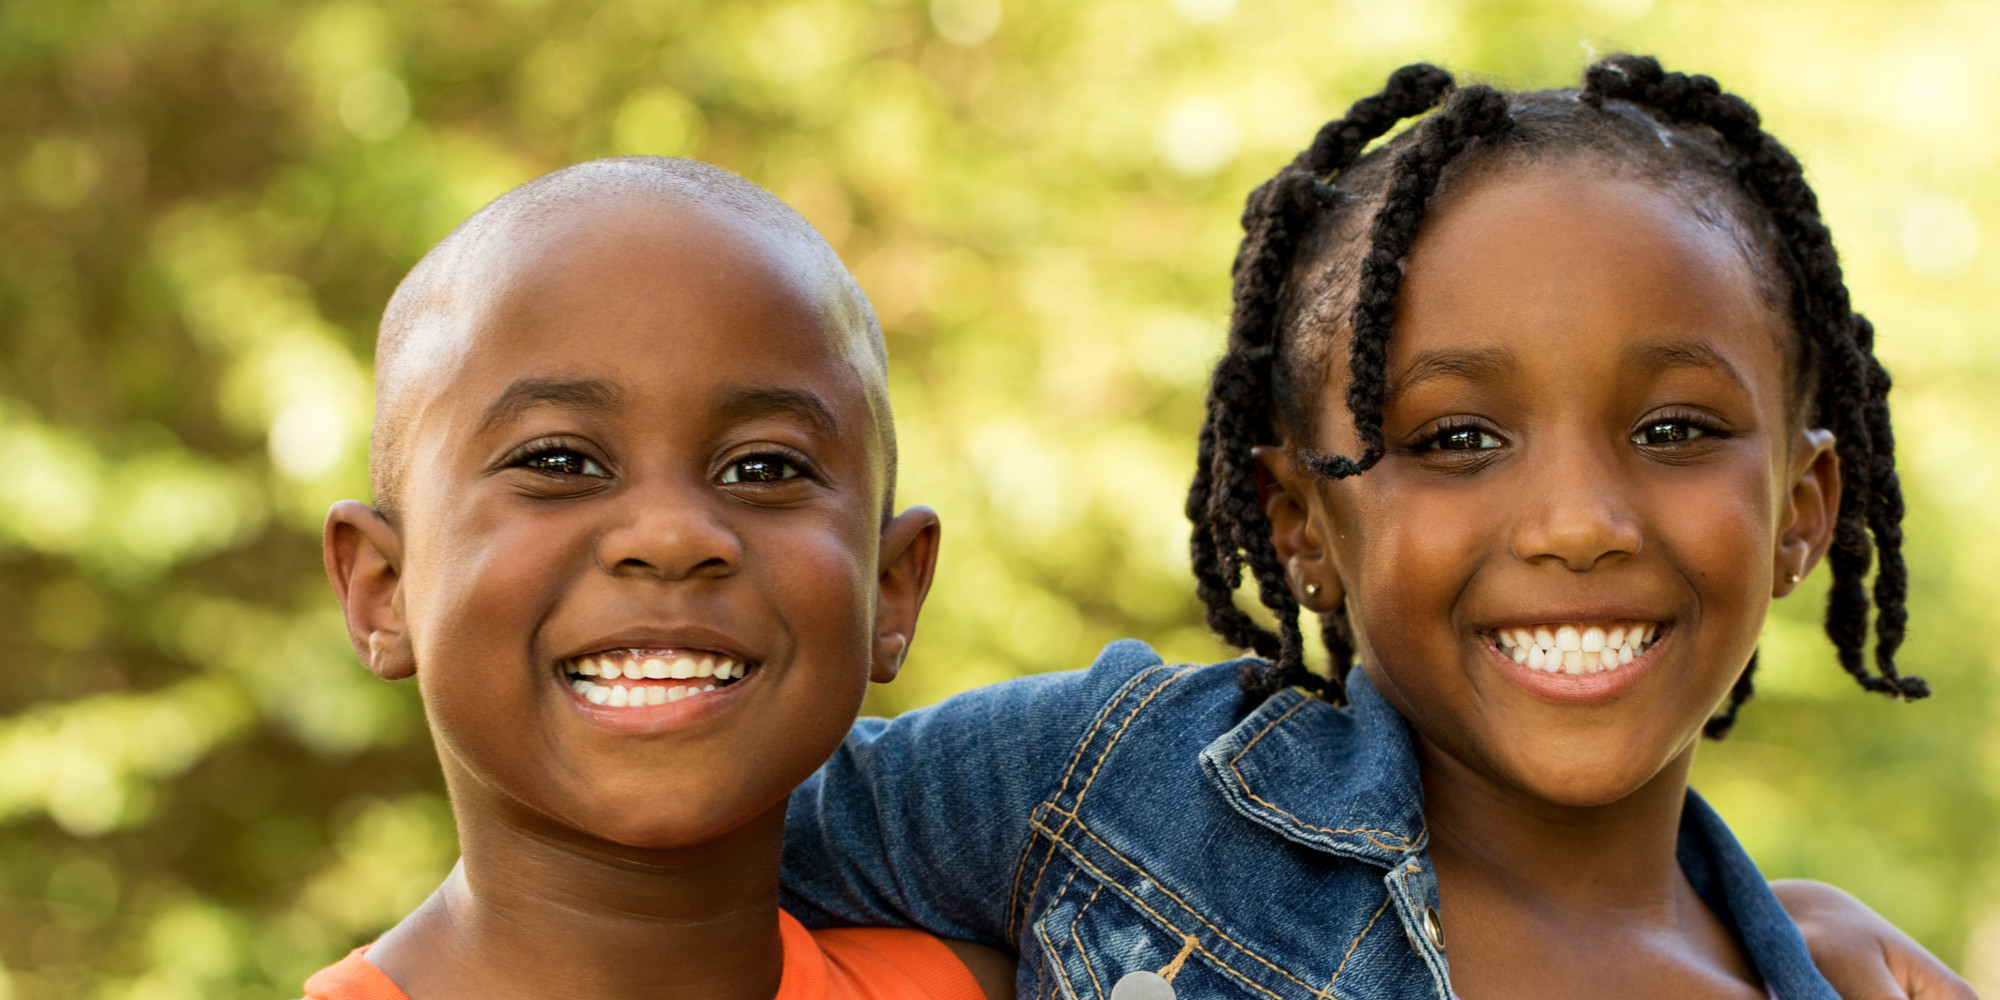 It's About The 100% Of Black Children: The 94 % In Traditional ...